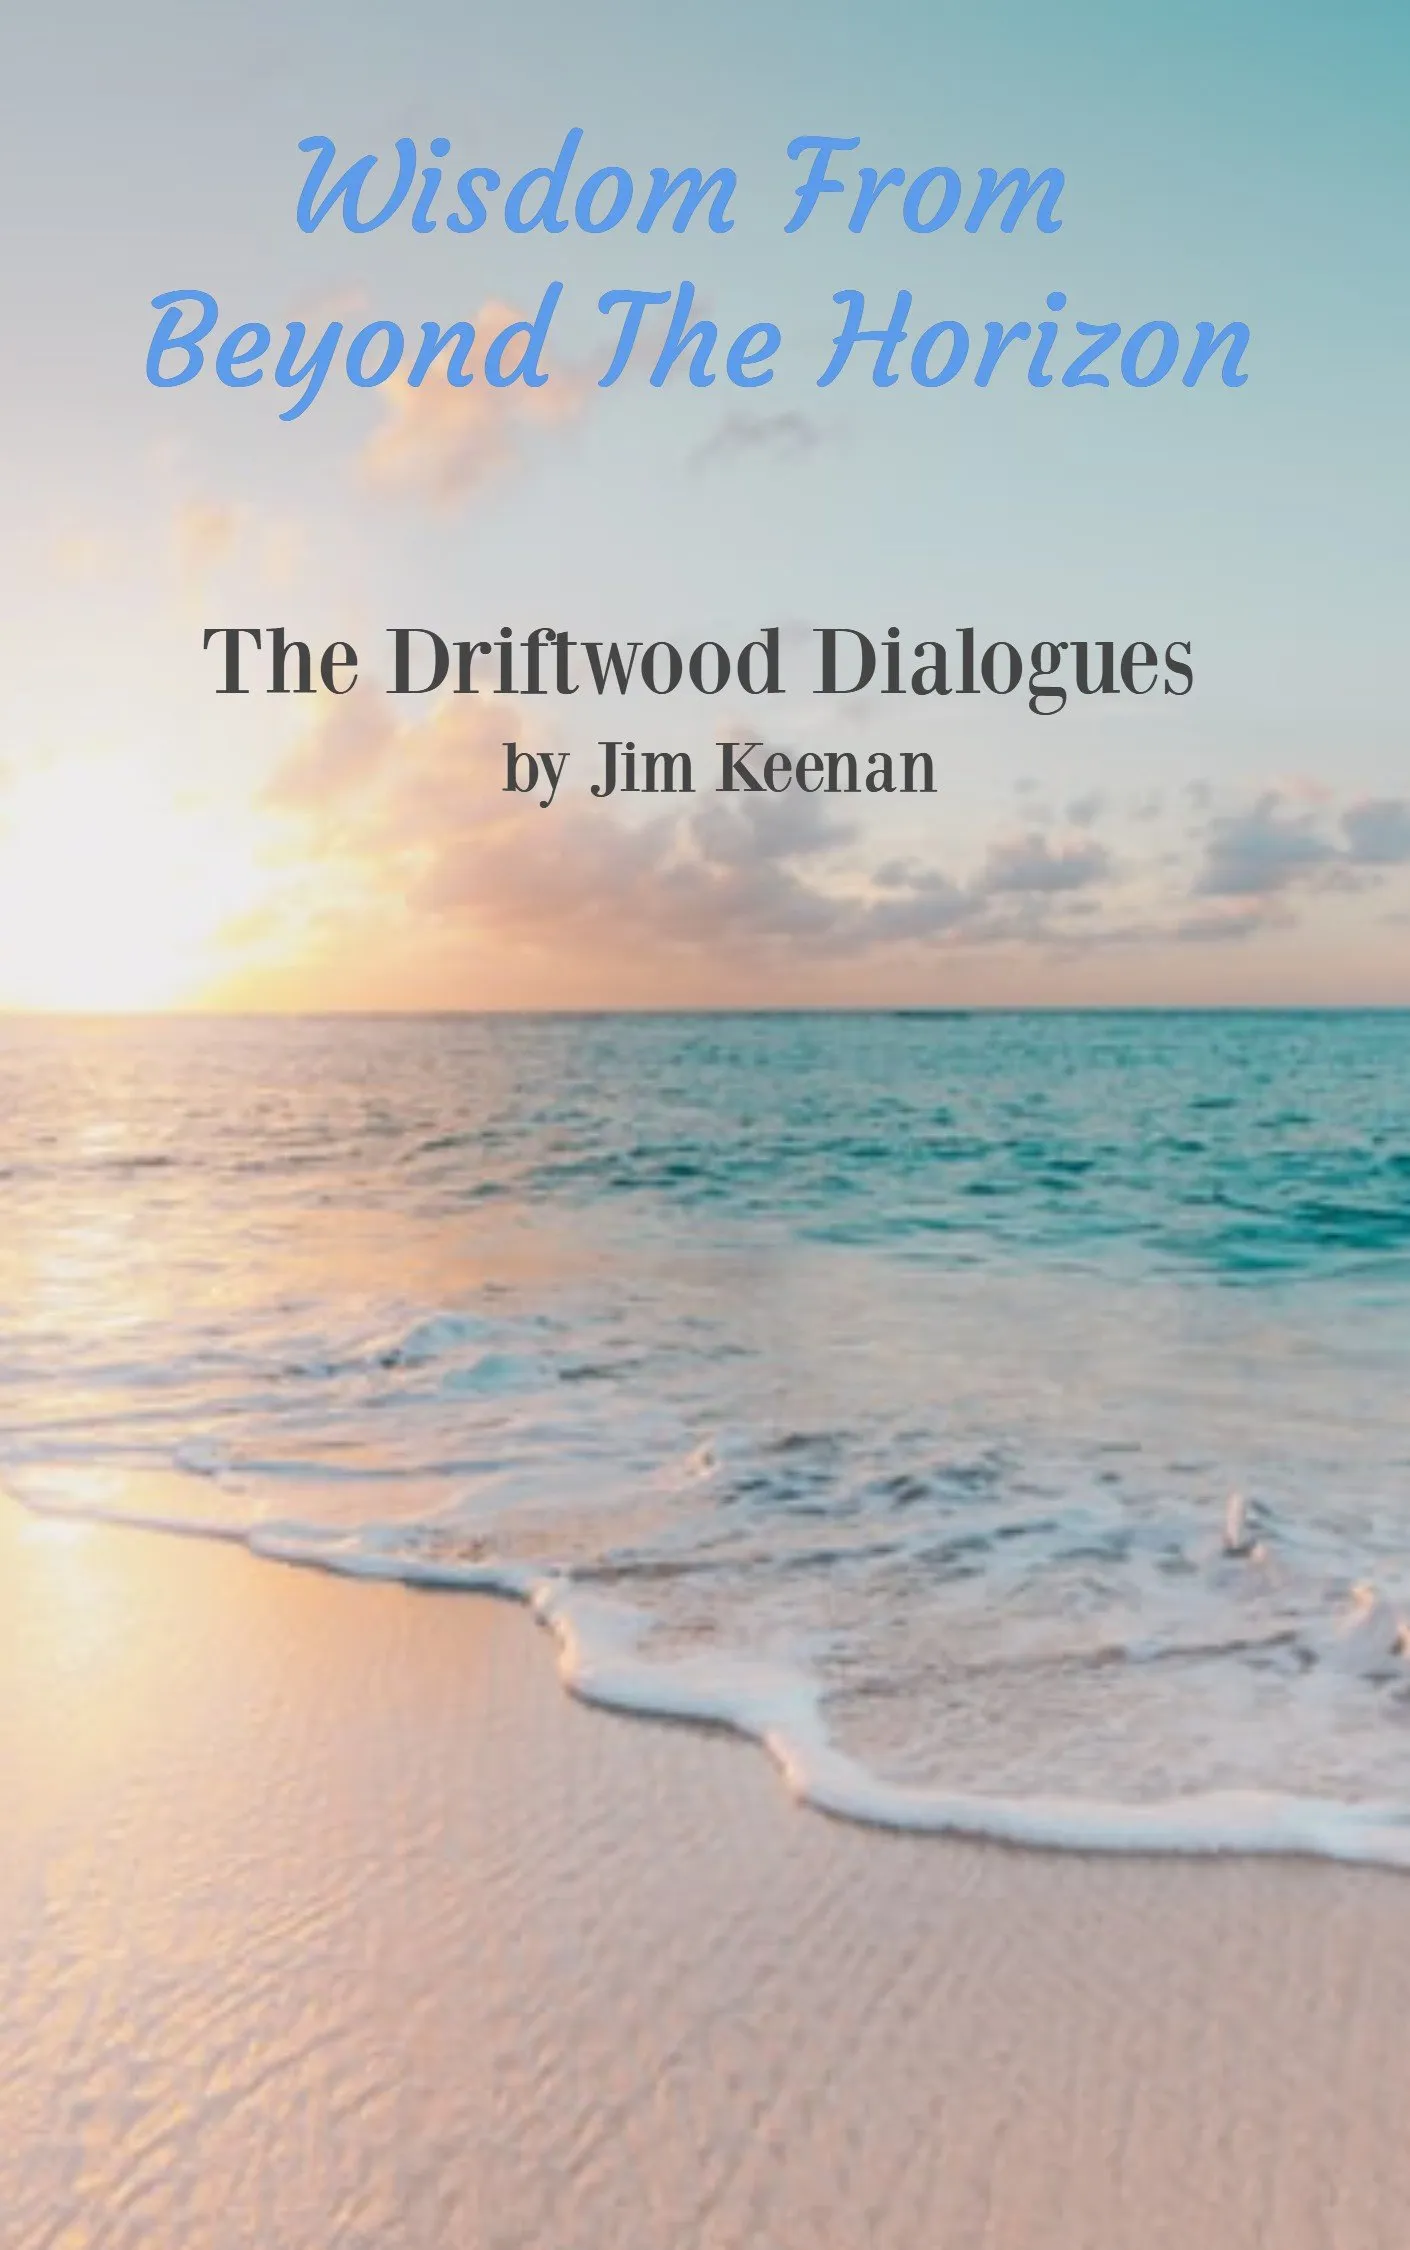 The Driftwood Dialogues by Jim Keenan The Poet With A Point